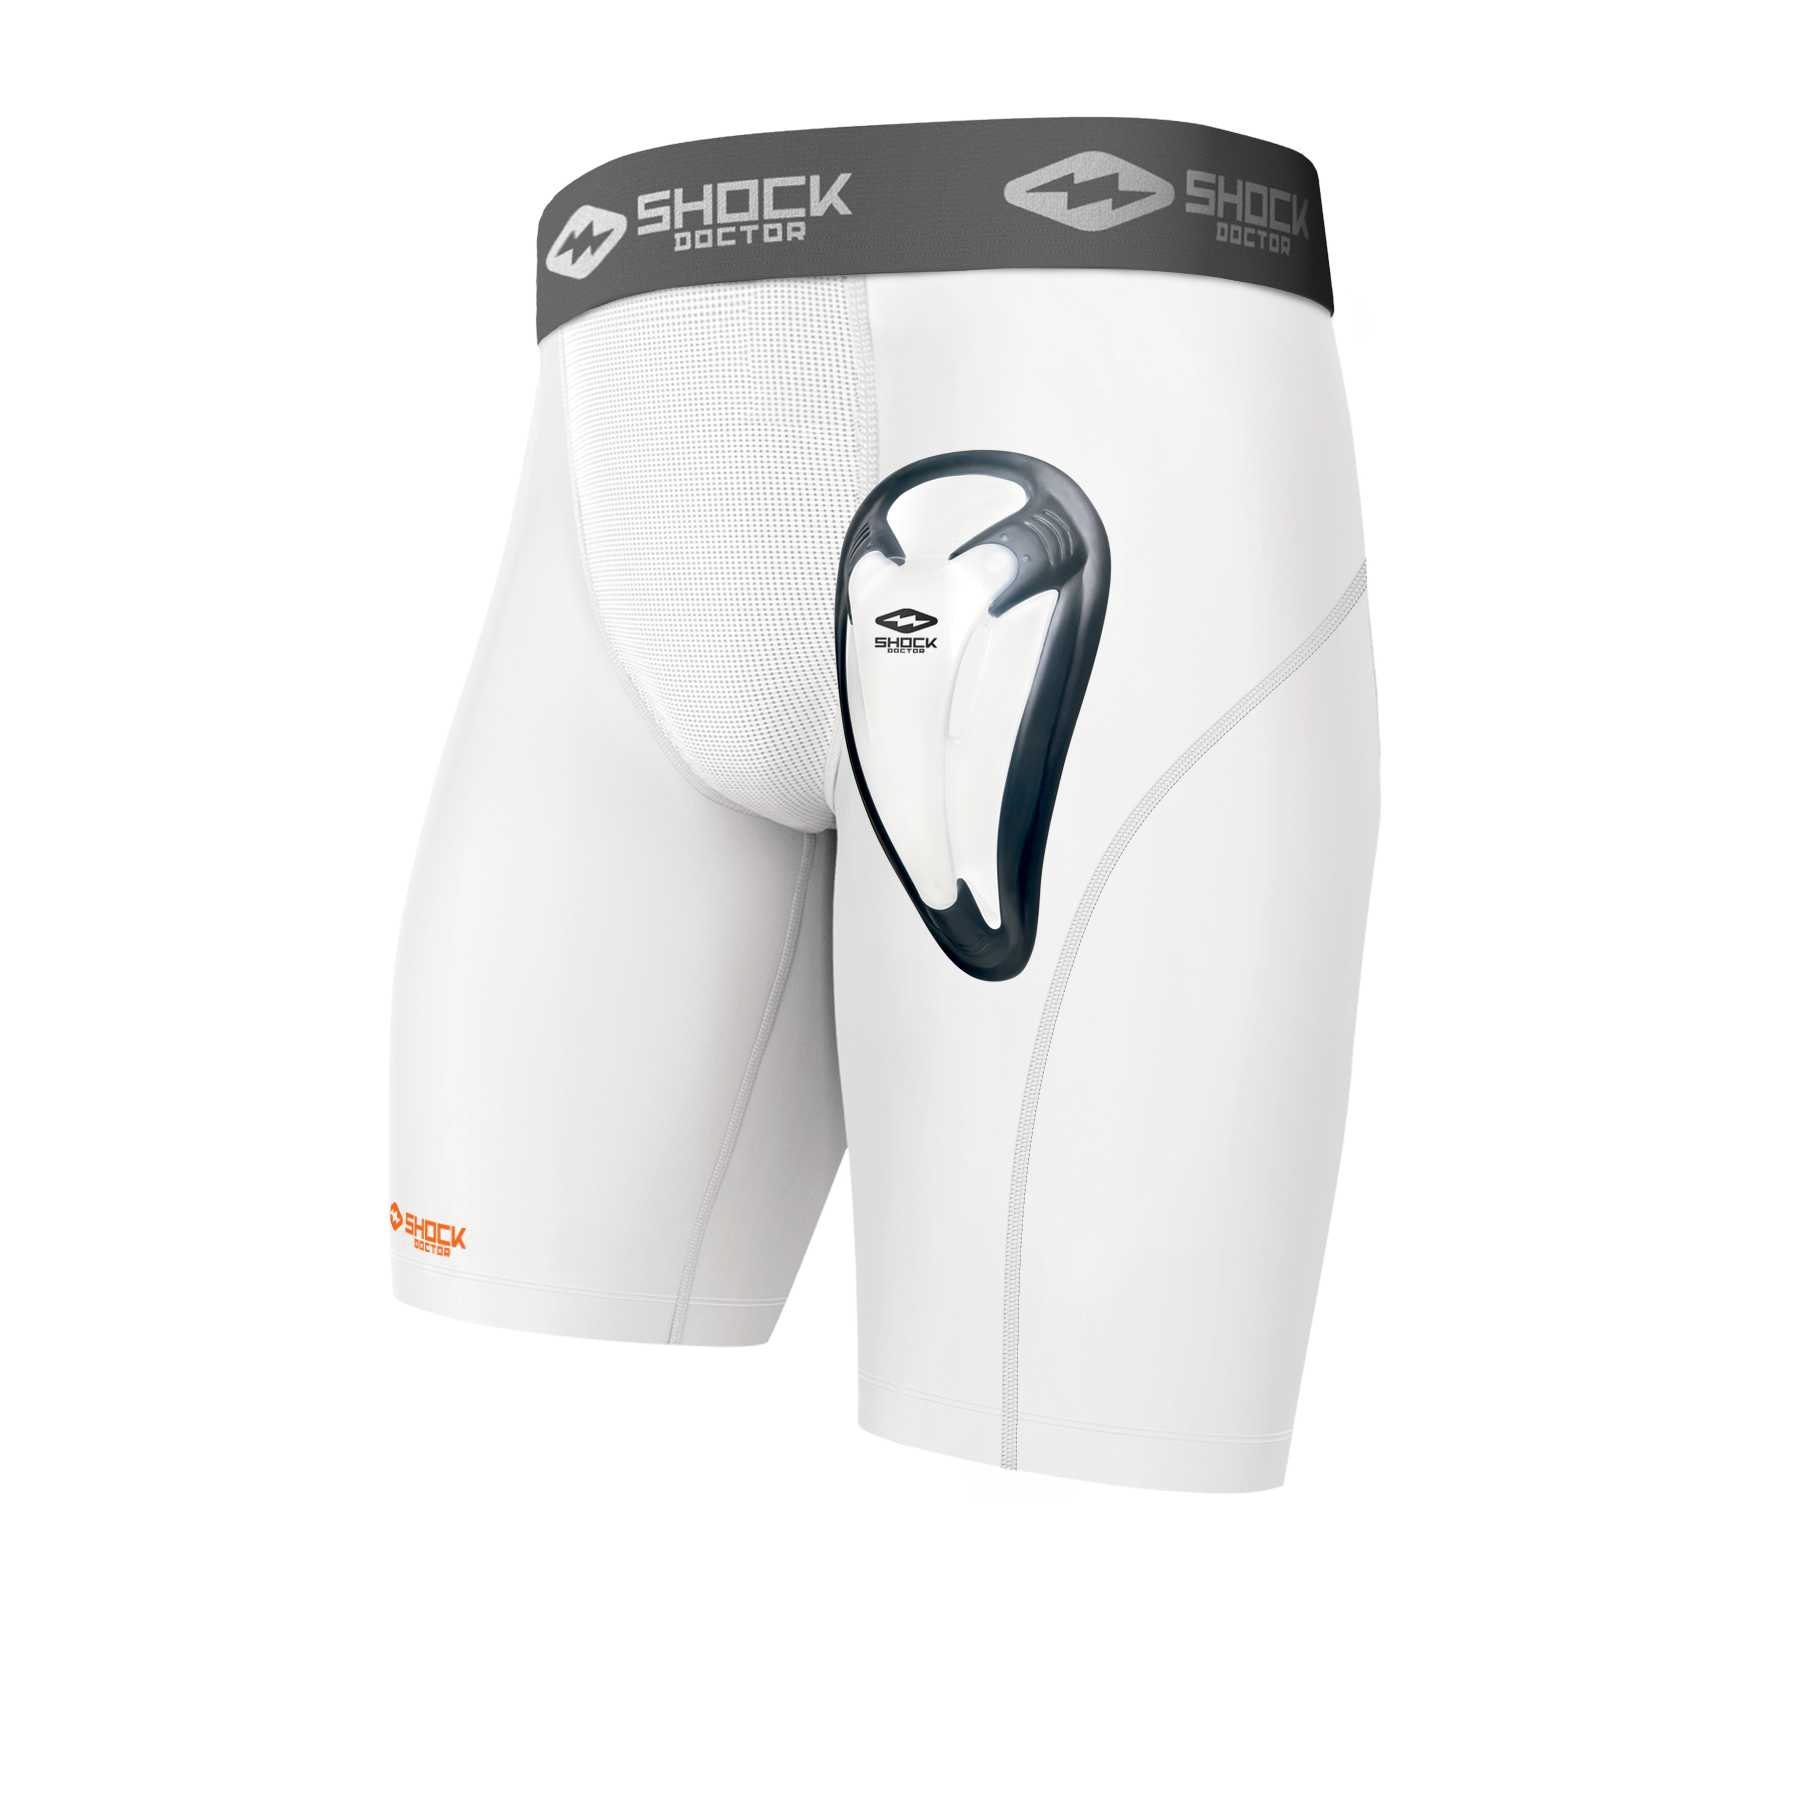 Senior Compression Hockey Jock Short with AirCore Hard Cup from